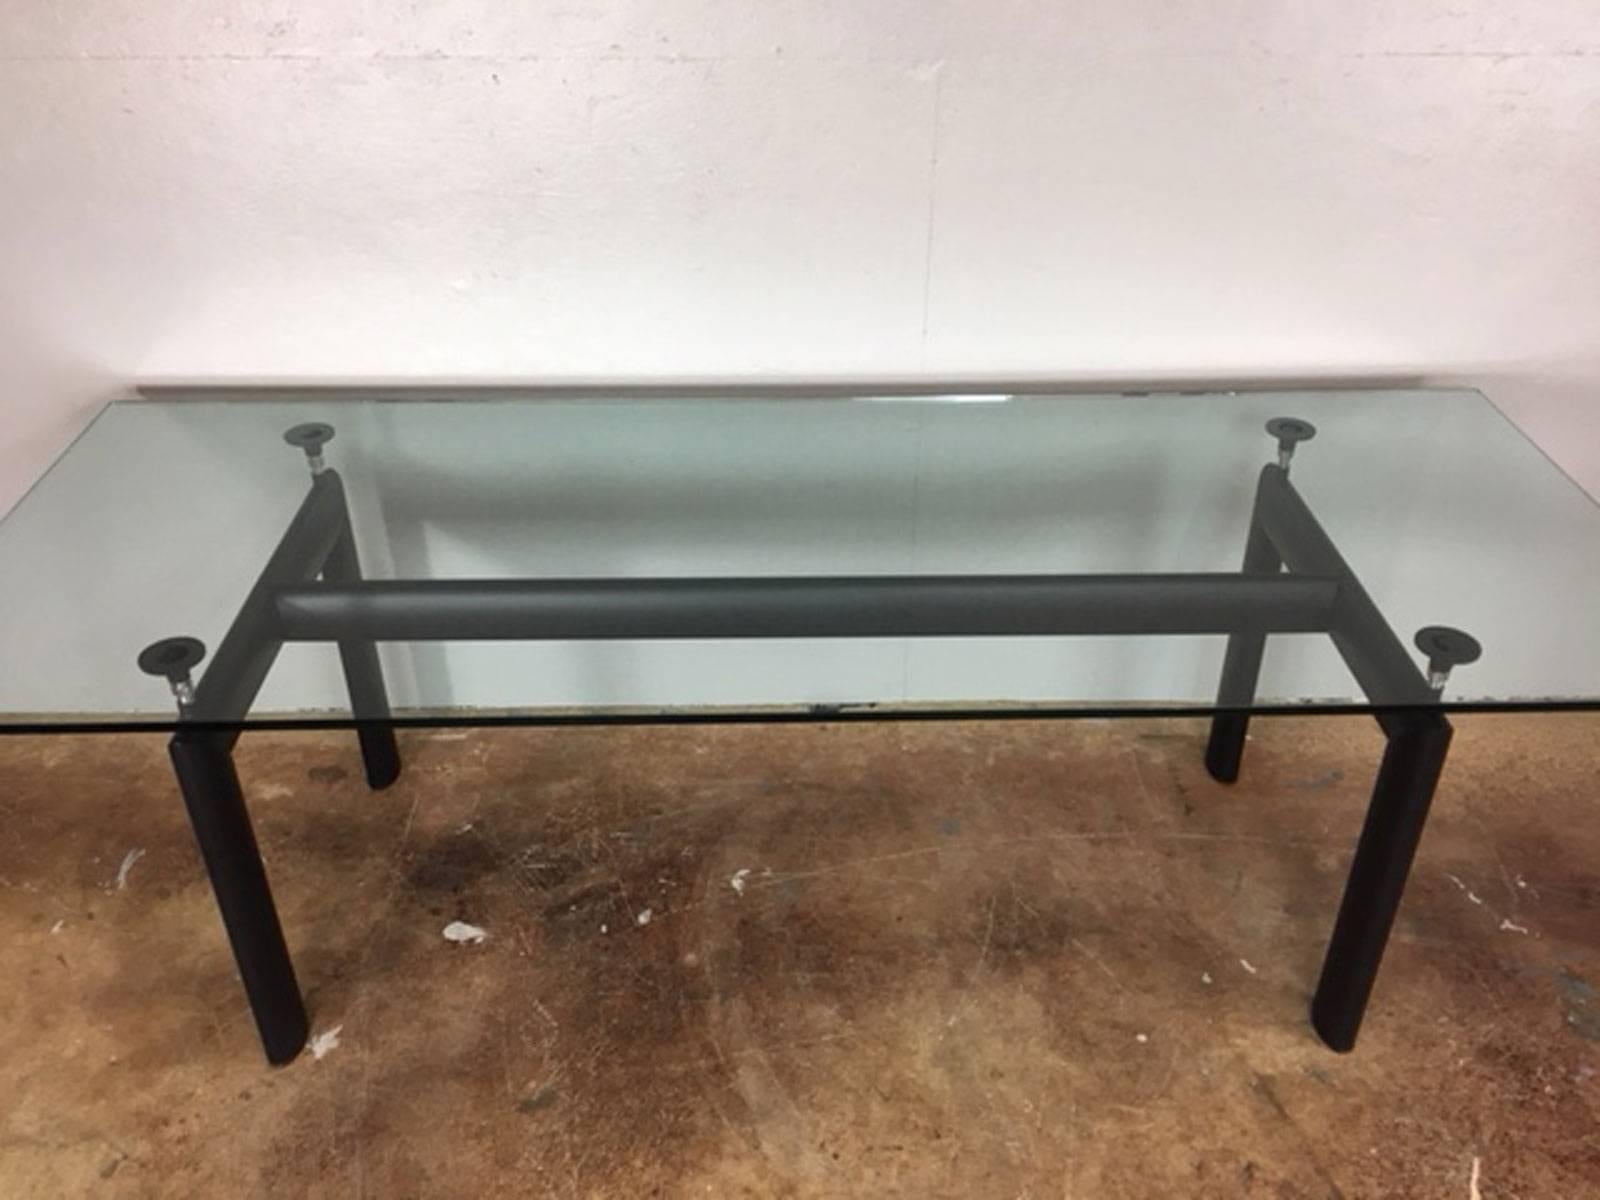 Cassina manufactured modern glass and steel designed by Le Corbusier. Table is signed. Superb condition.